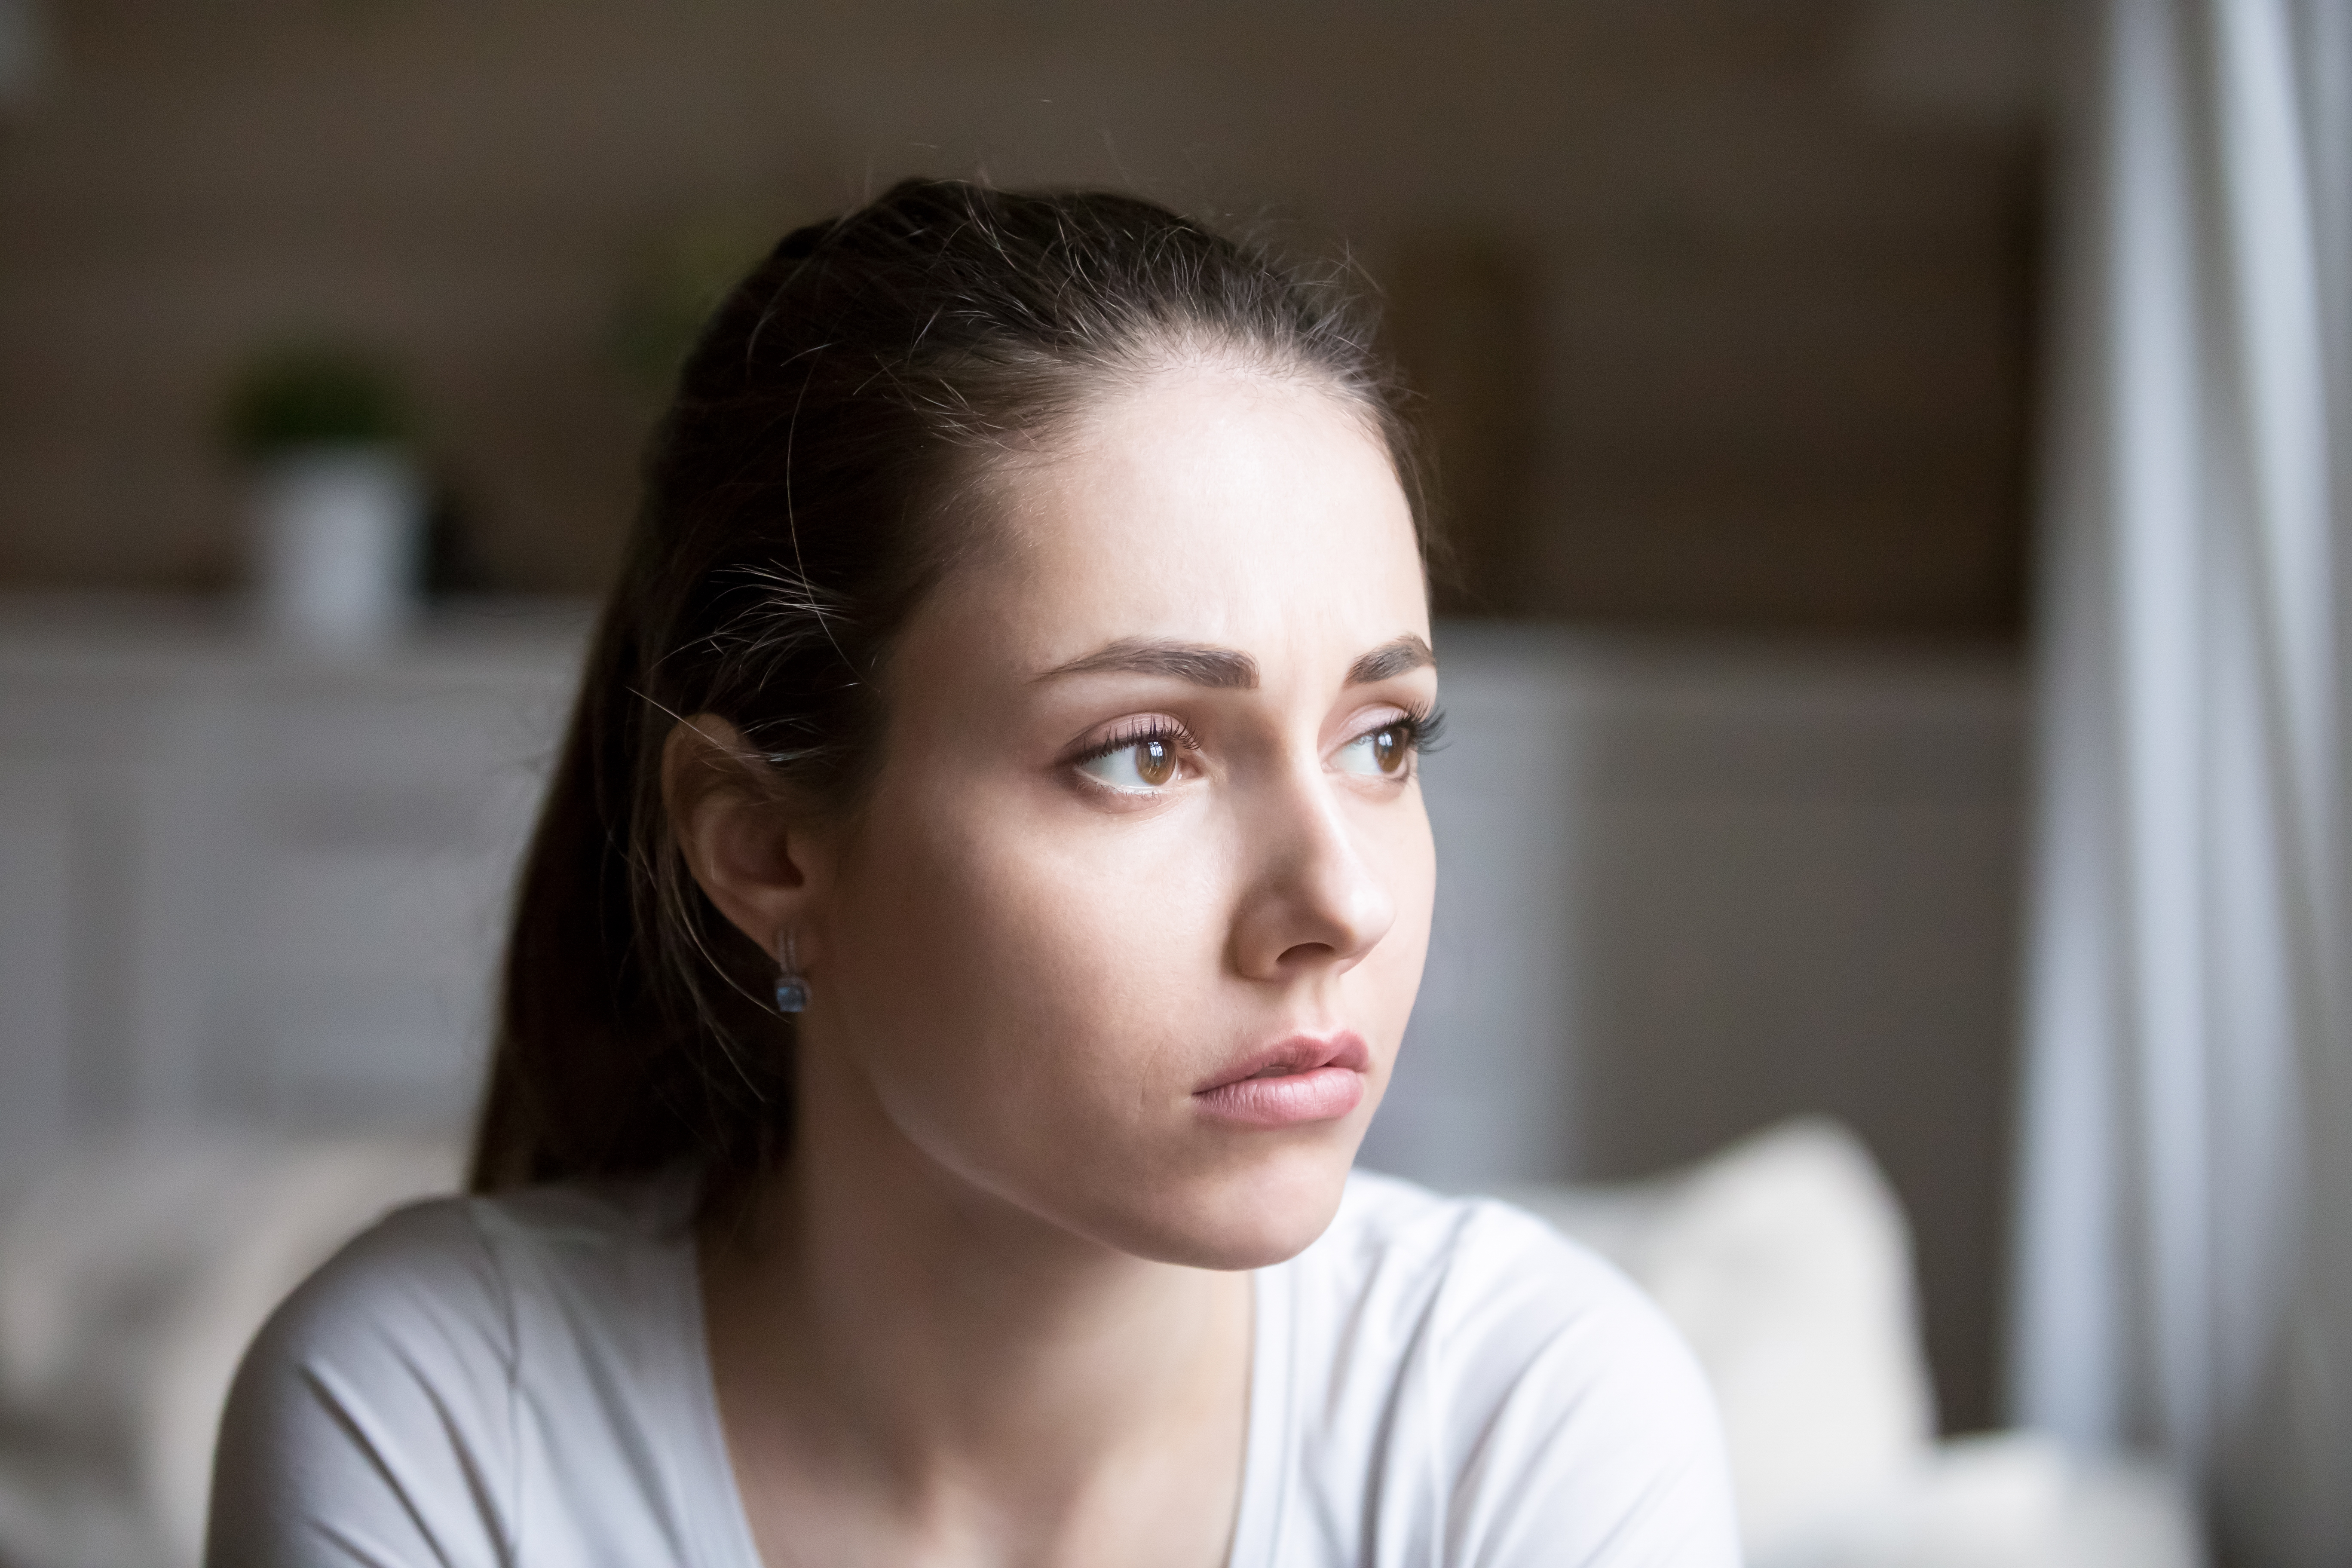 Young woman looking sad | Source: Shutterstock